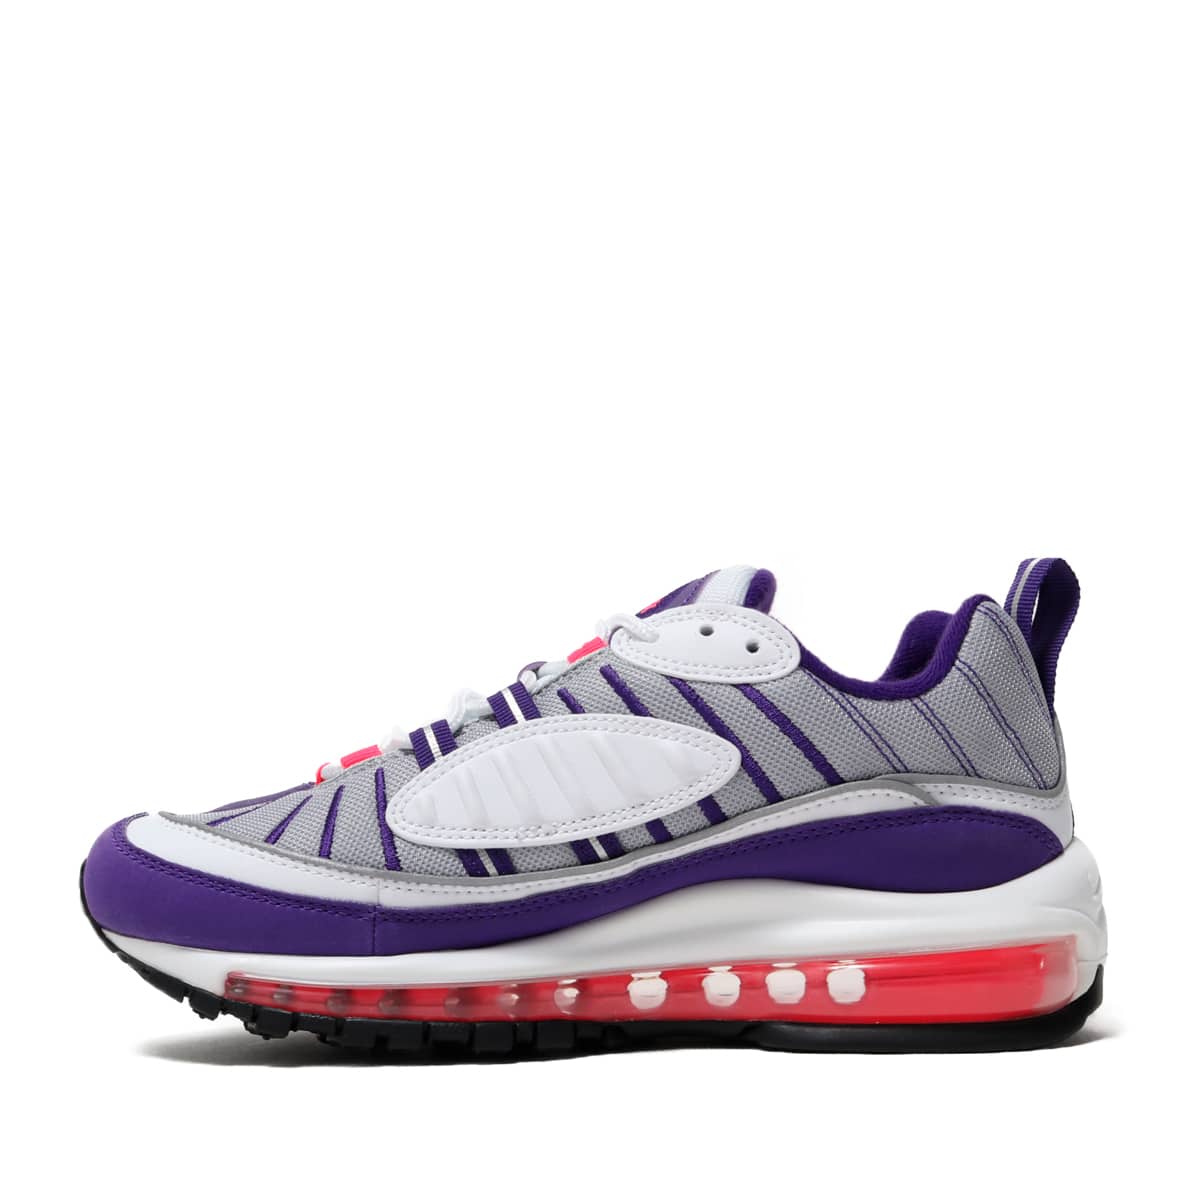 NIKE W AIR MAX 98 WHITE/RACER PINK-REFLECT SILVER-BLACK 19SP-I